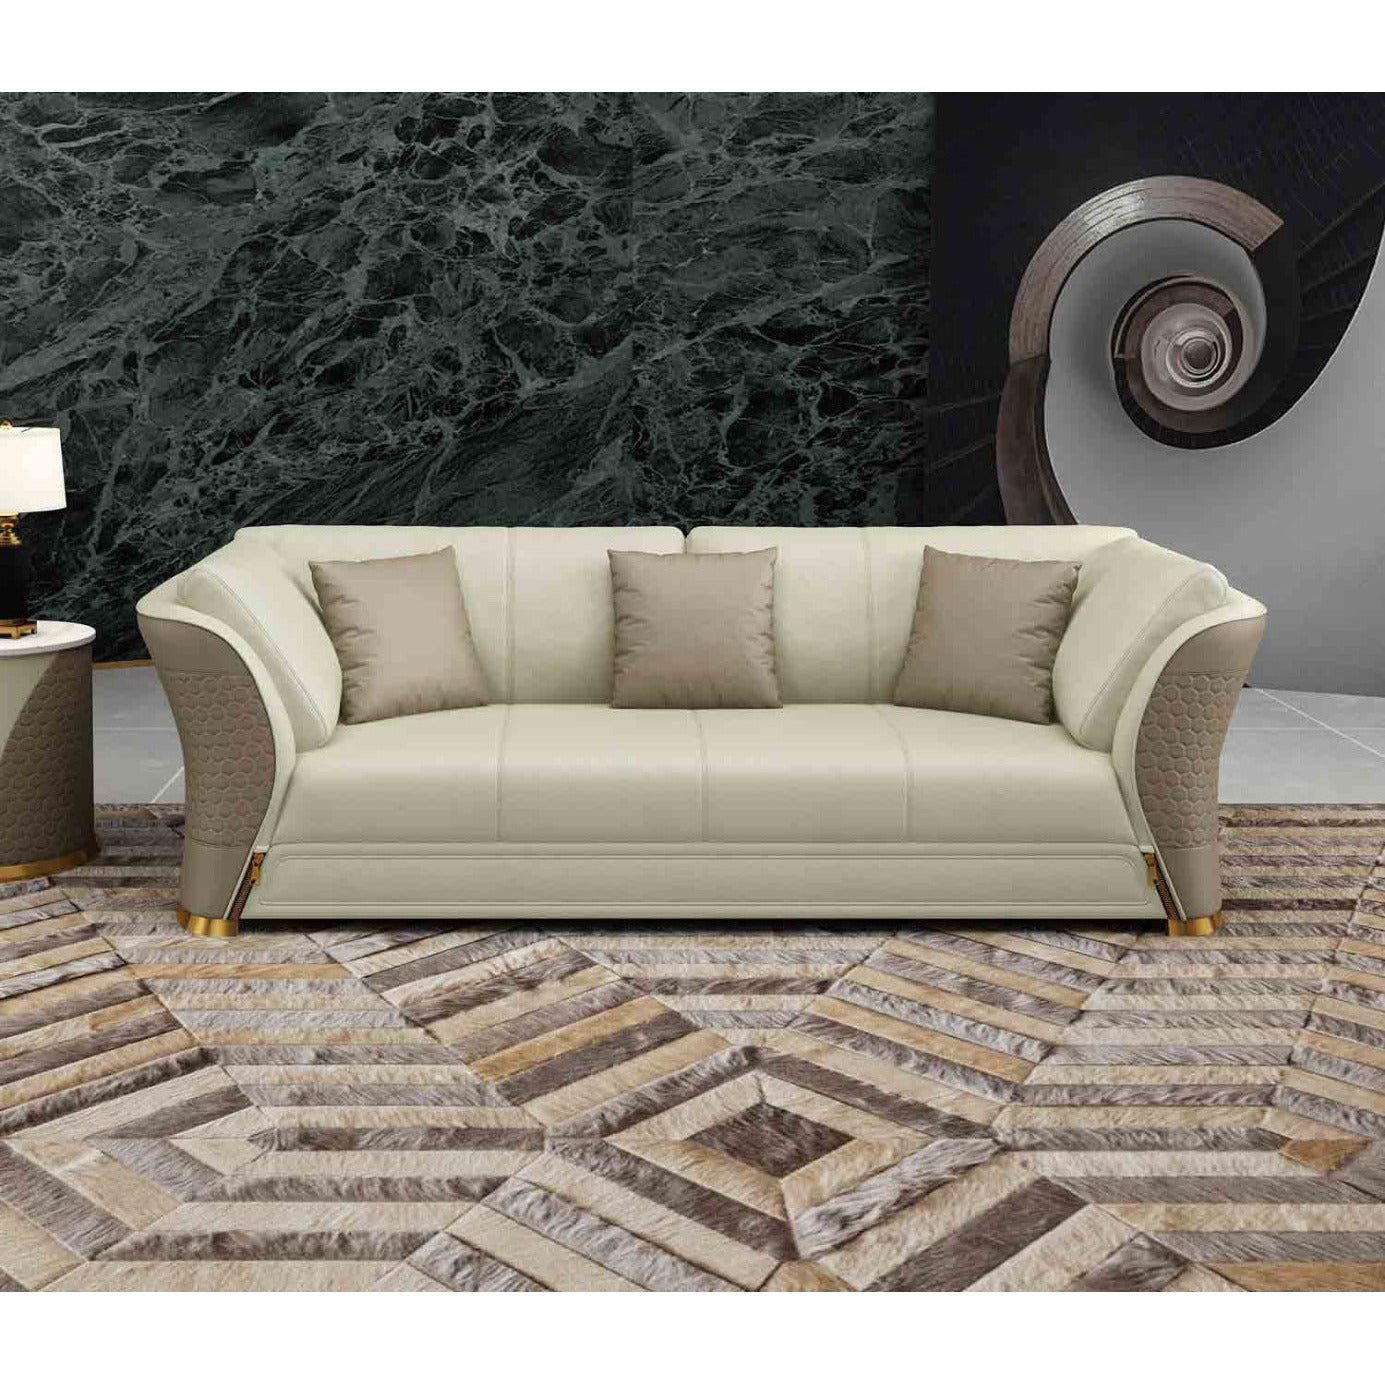 European Furniture - Vogue Sofa in Taupe-Beige - 27991-S - New Star Living